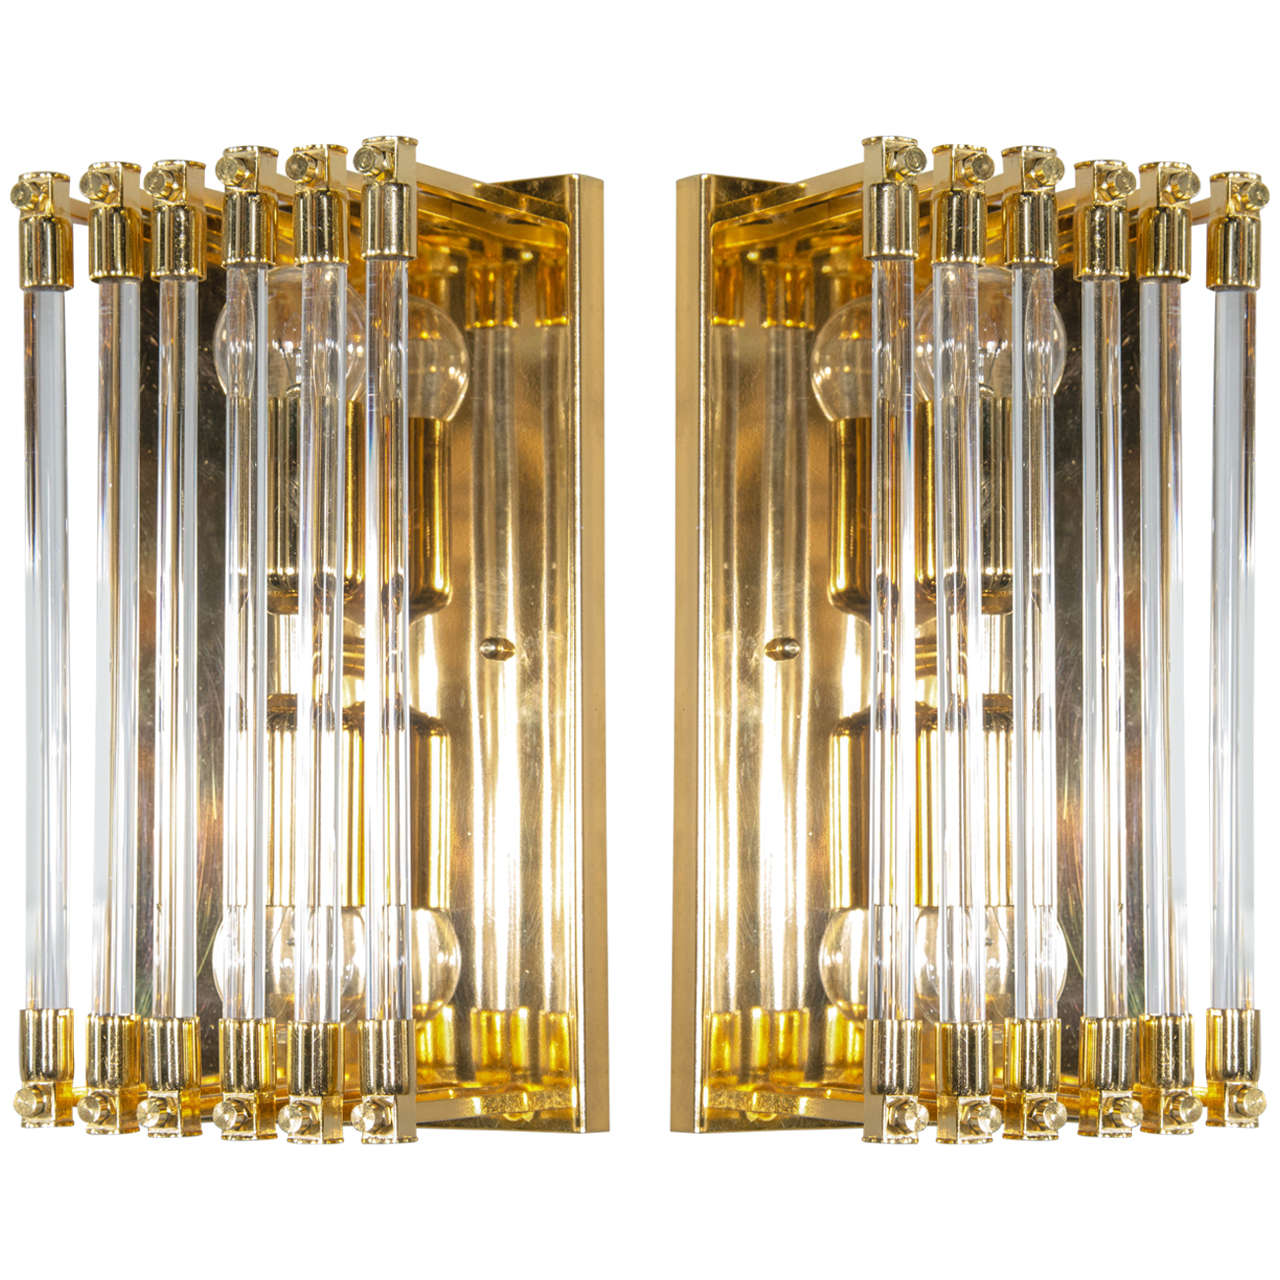 Pair of Mid-Century Modernist Brass and Glass Rod Sconces